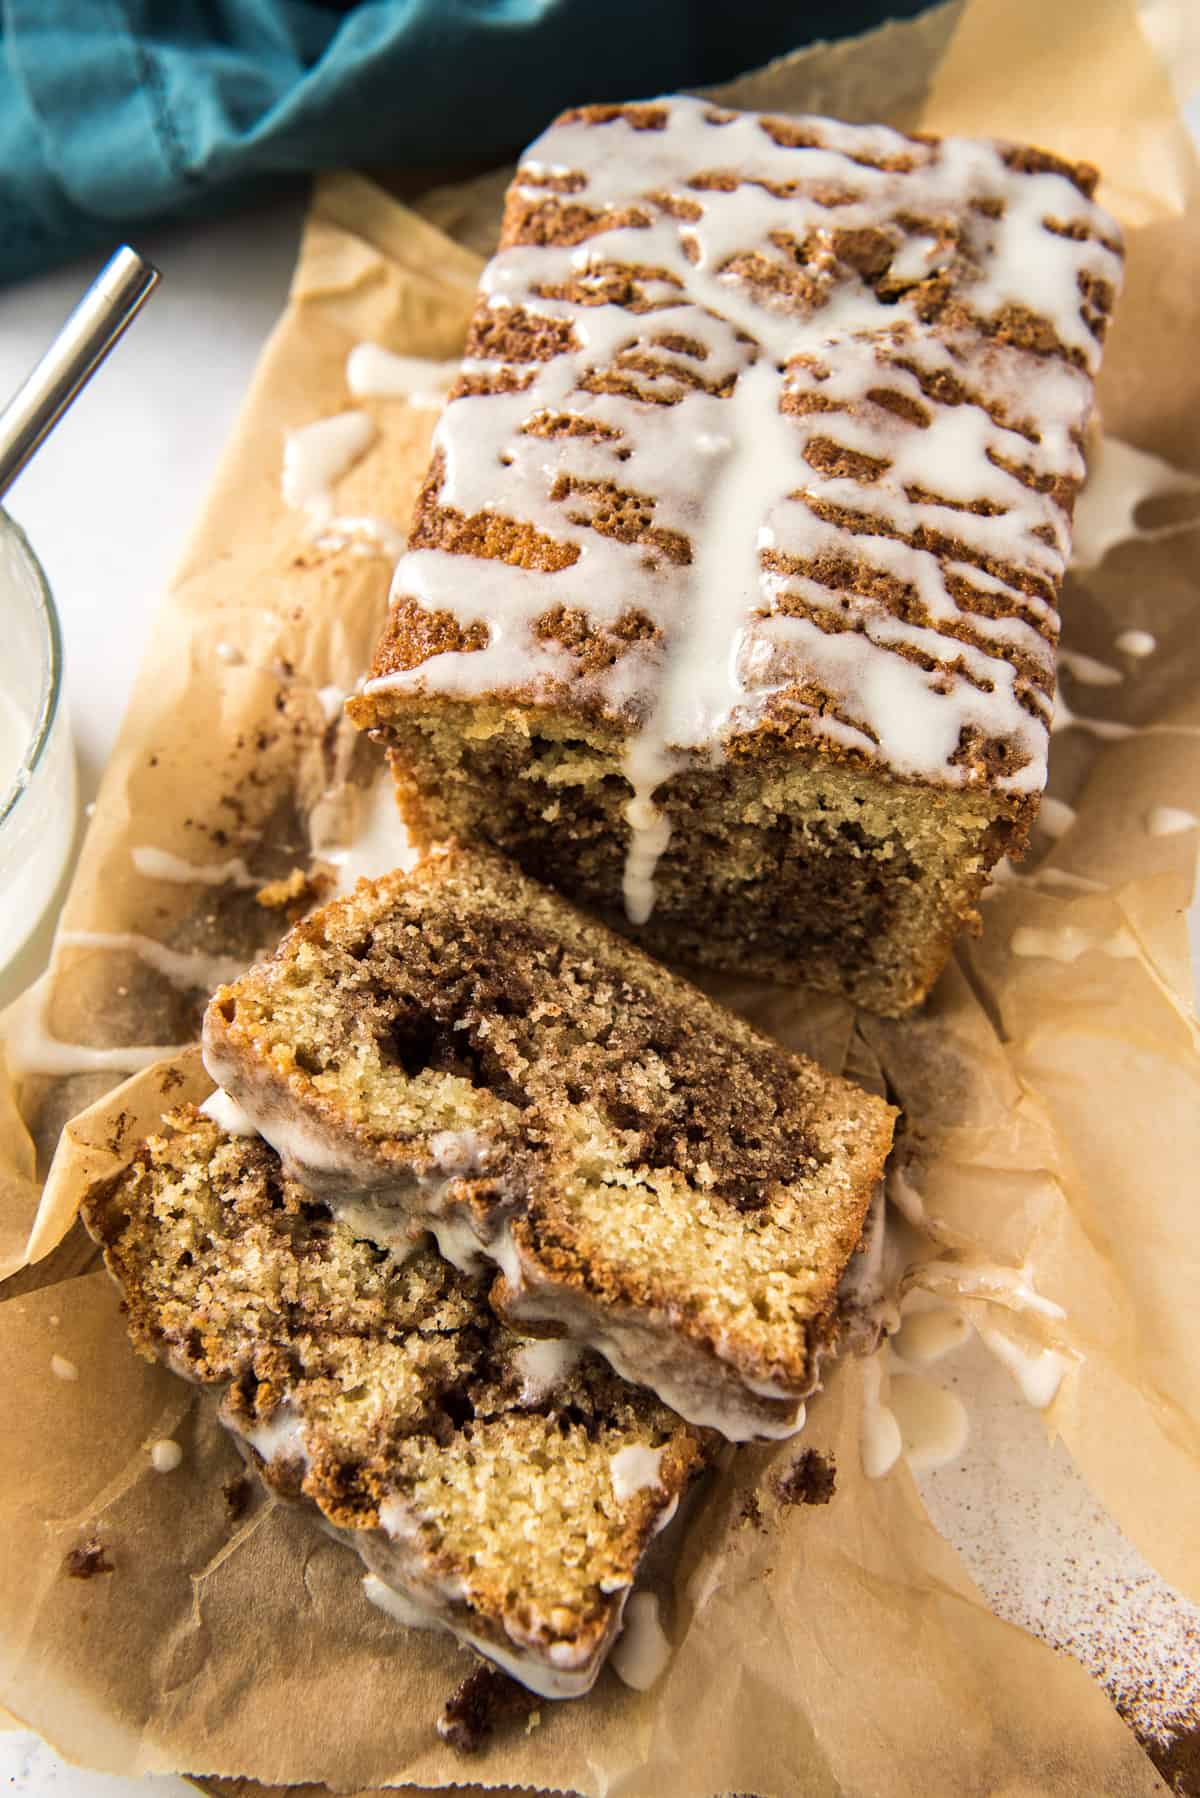 A sliced loaf of Cinnamon Swirl Quick Bread on a sheet of parchment paper.